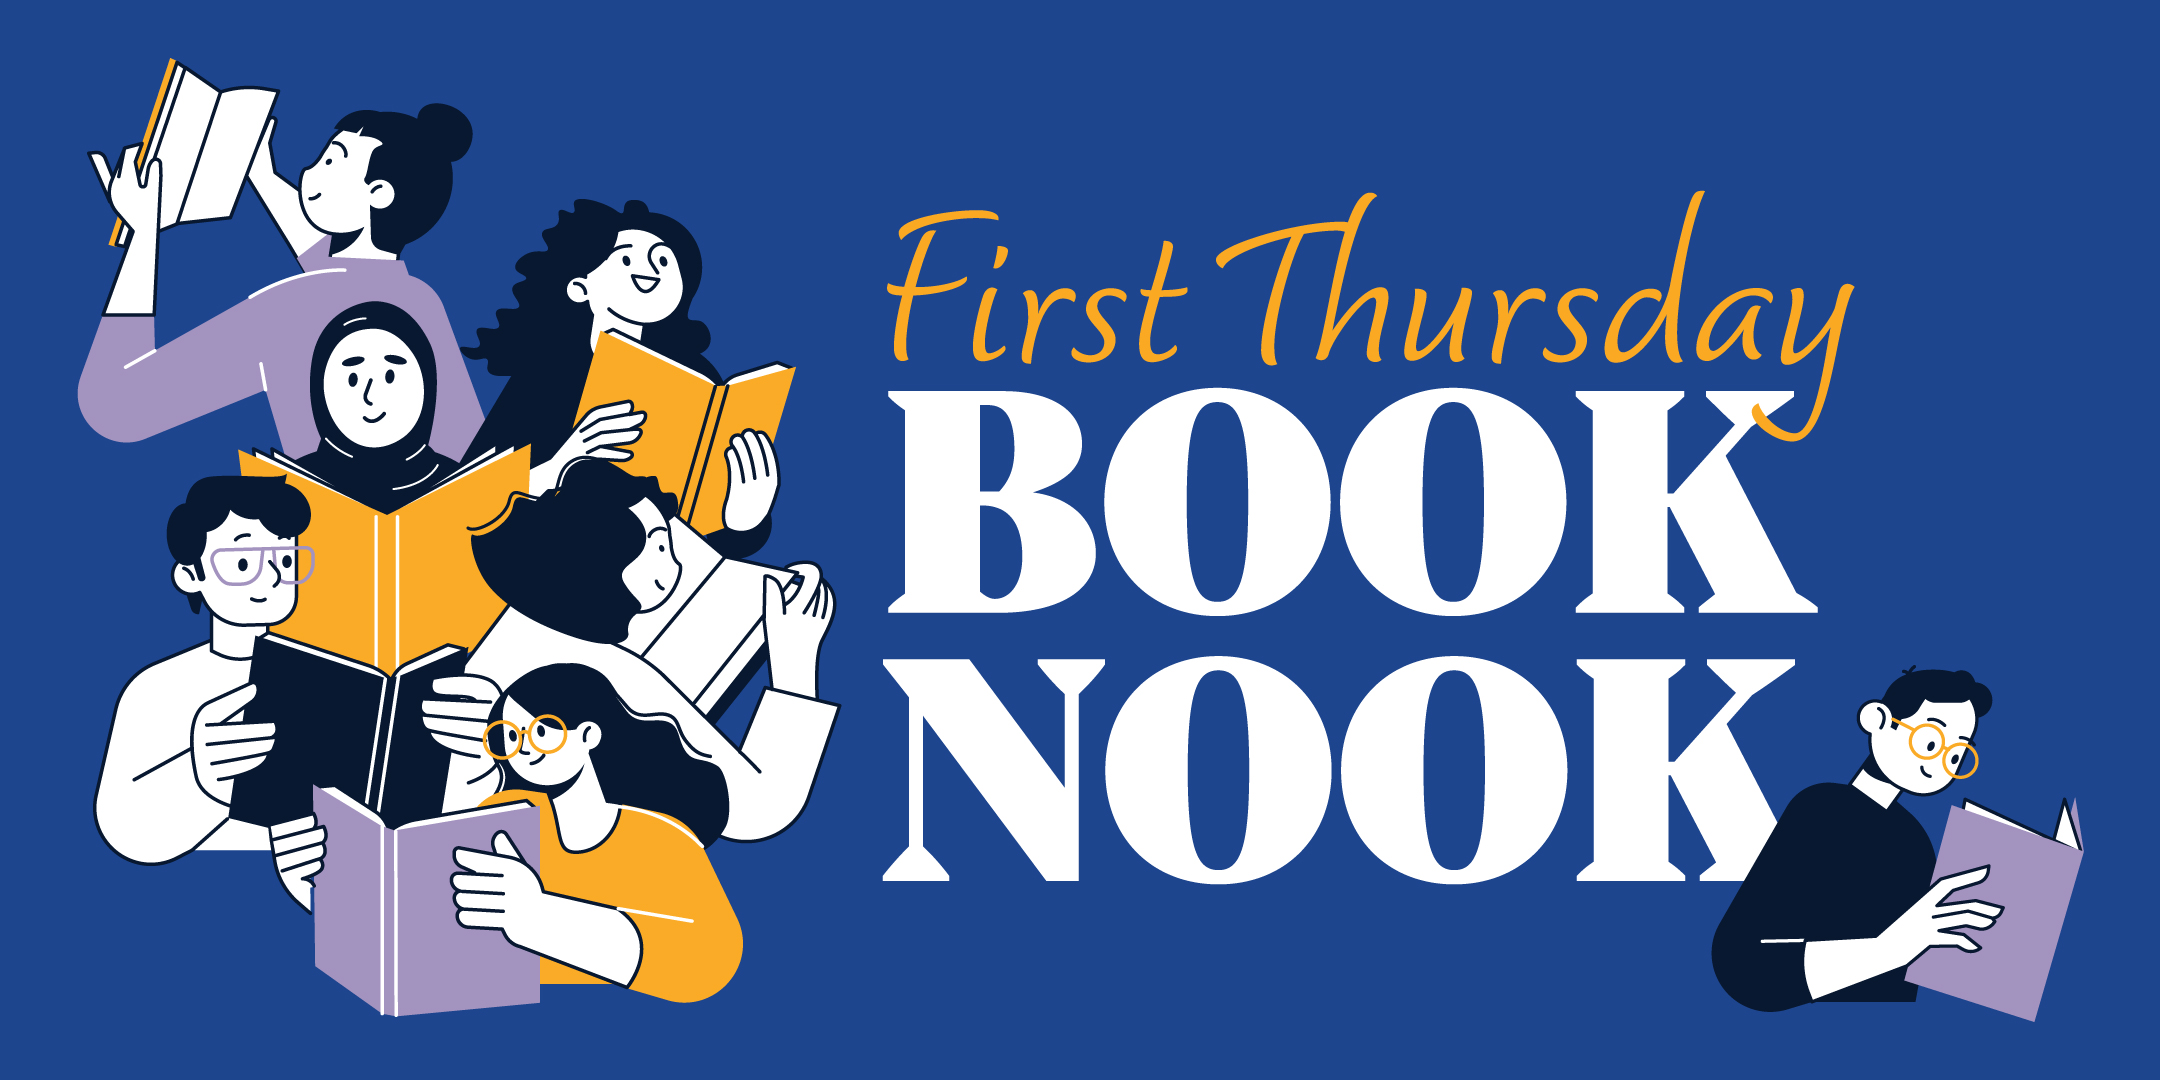 Graphic in blue, yellow, purple and white showing smiling people holding open books. Text says First Thursday Book Nook.